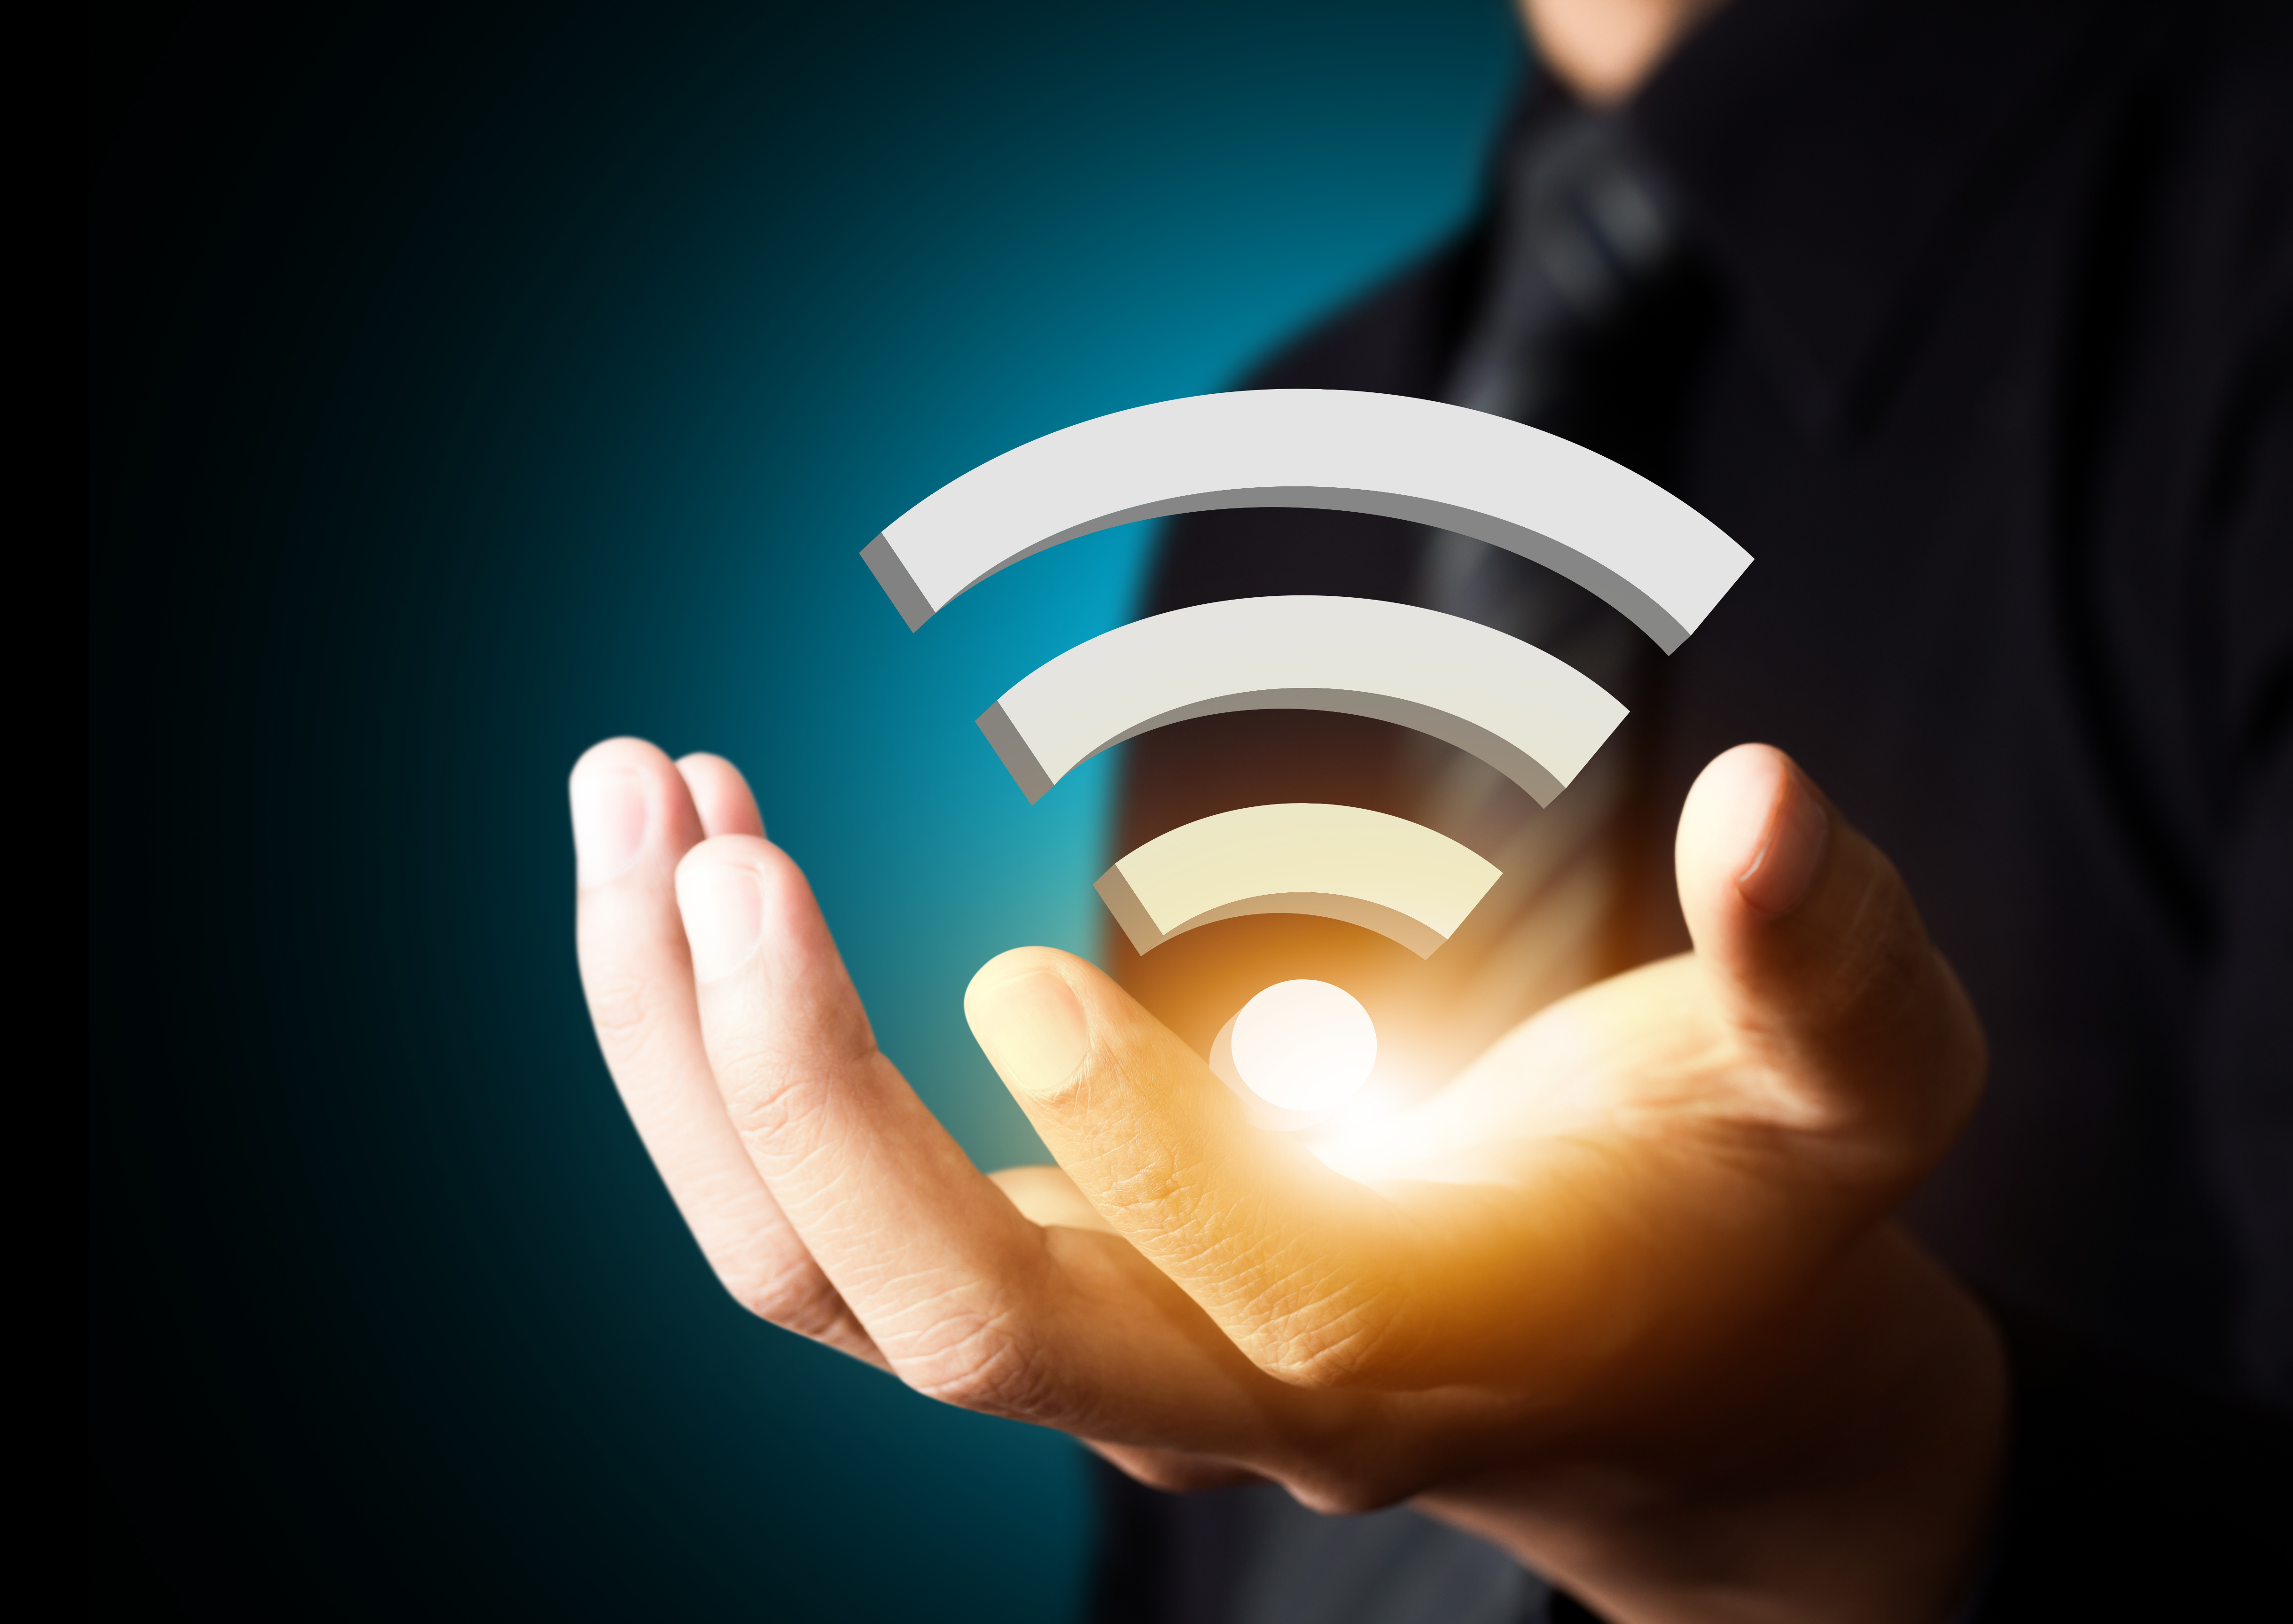 ‘Don’t let congestion humiliate your Wi-Fi’, says Riverbed expert